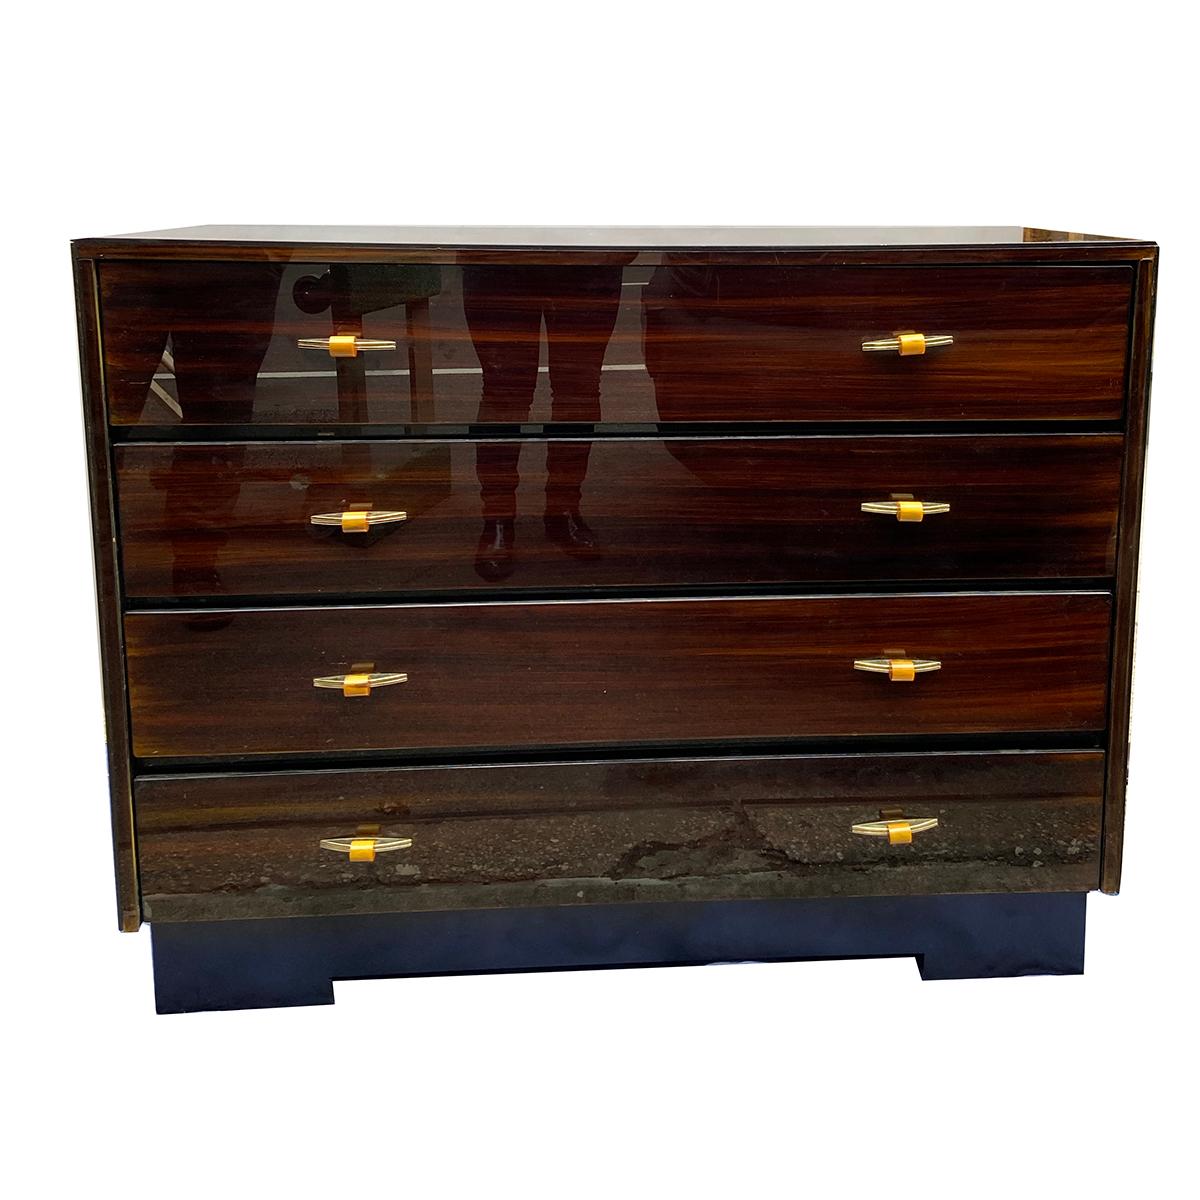 A pair of circa 1950s French verre églomisé chests of drawers with original finish and pulls and drawers retrofitted with a modern rail system.

Measurements:
Length 46